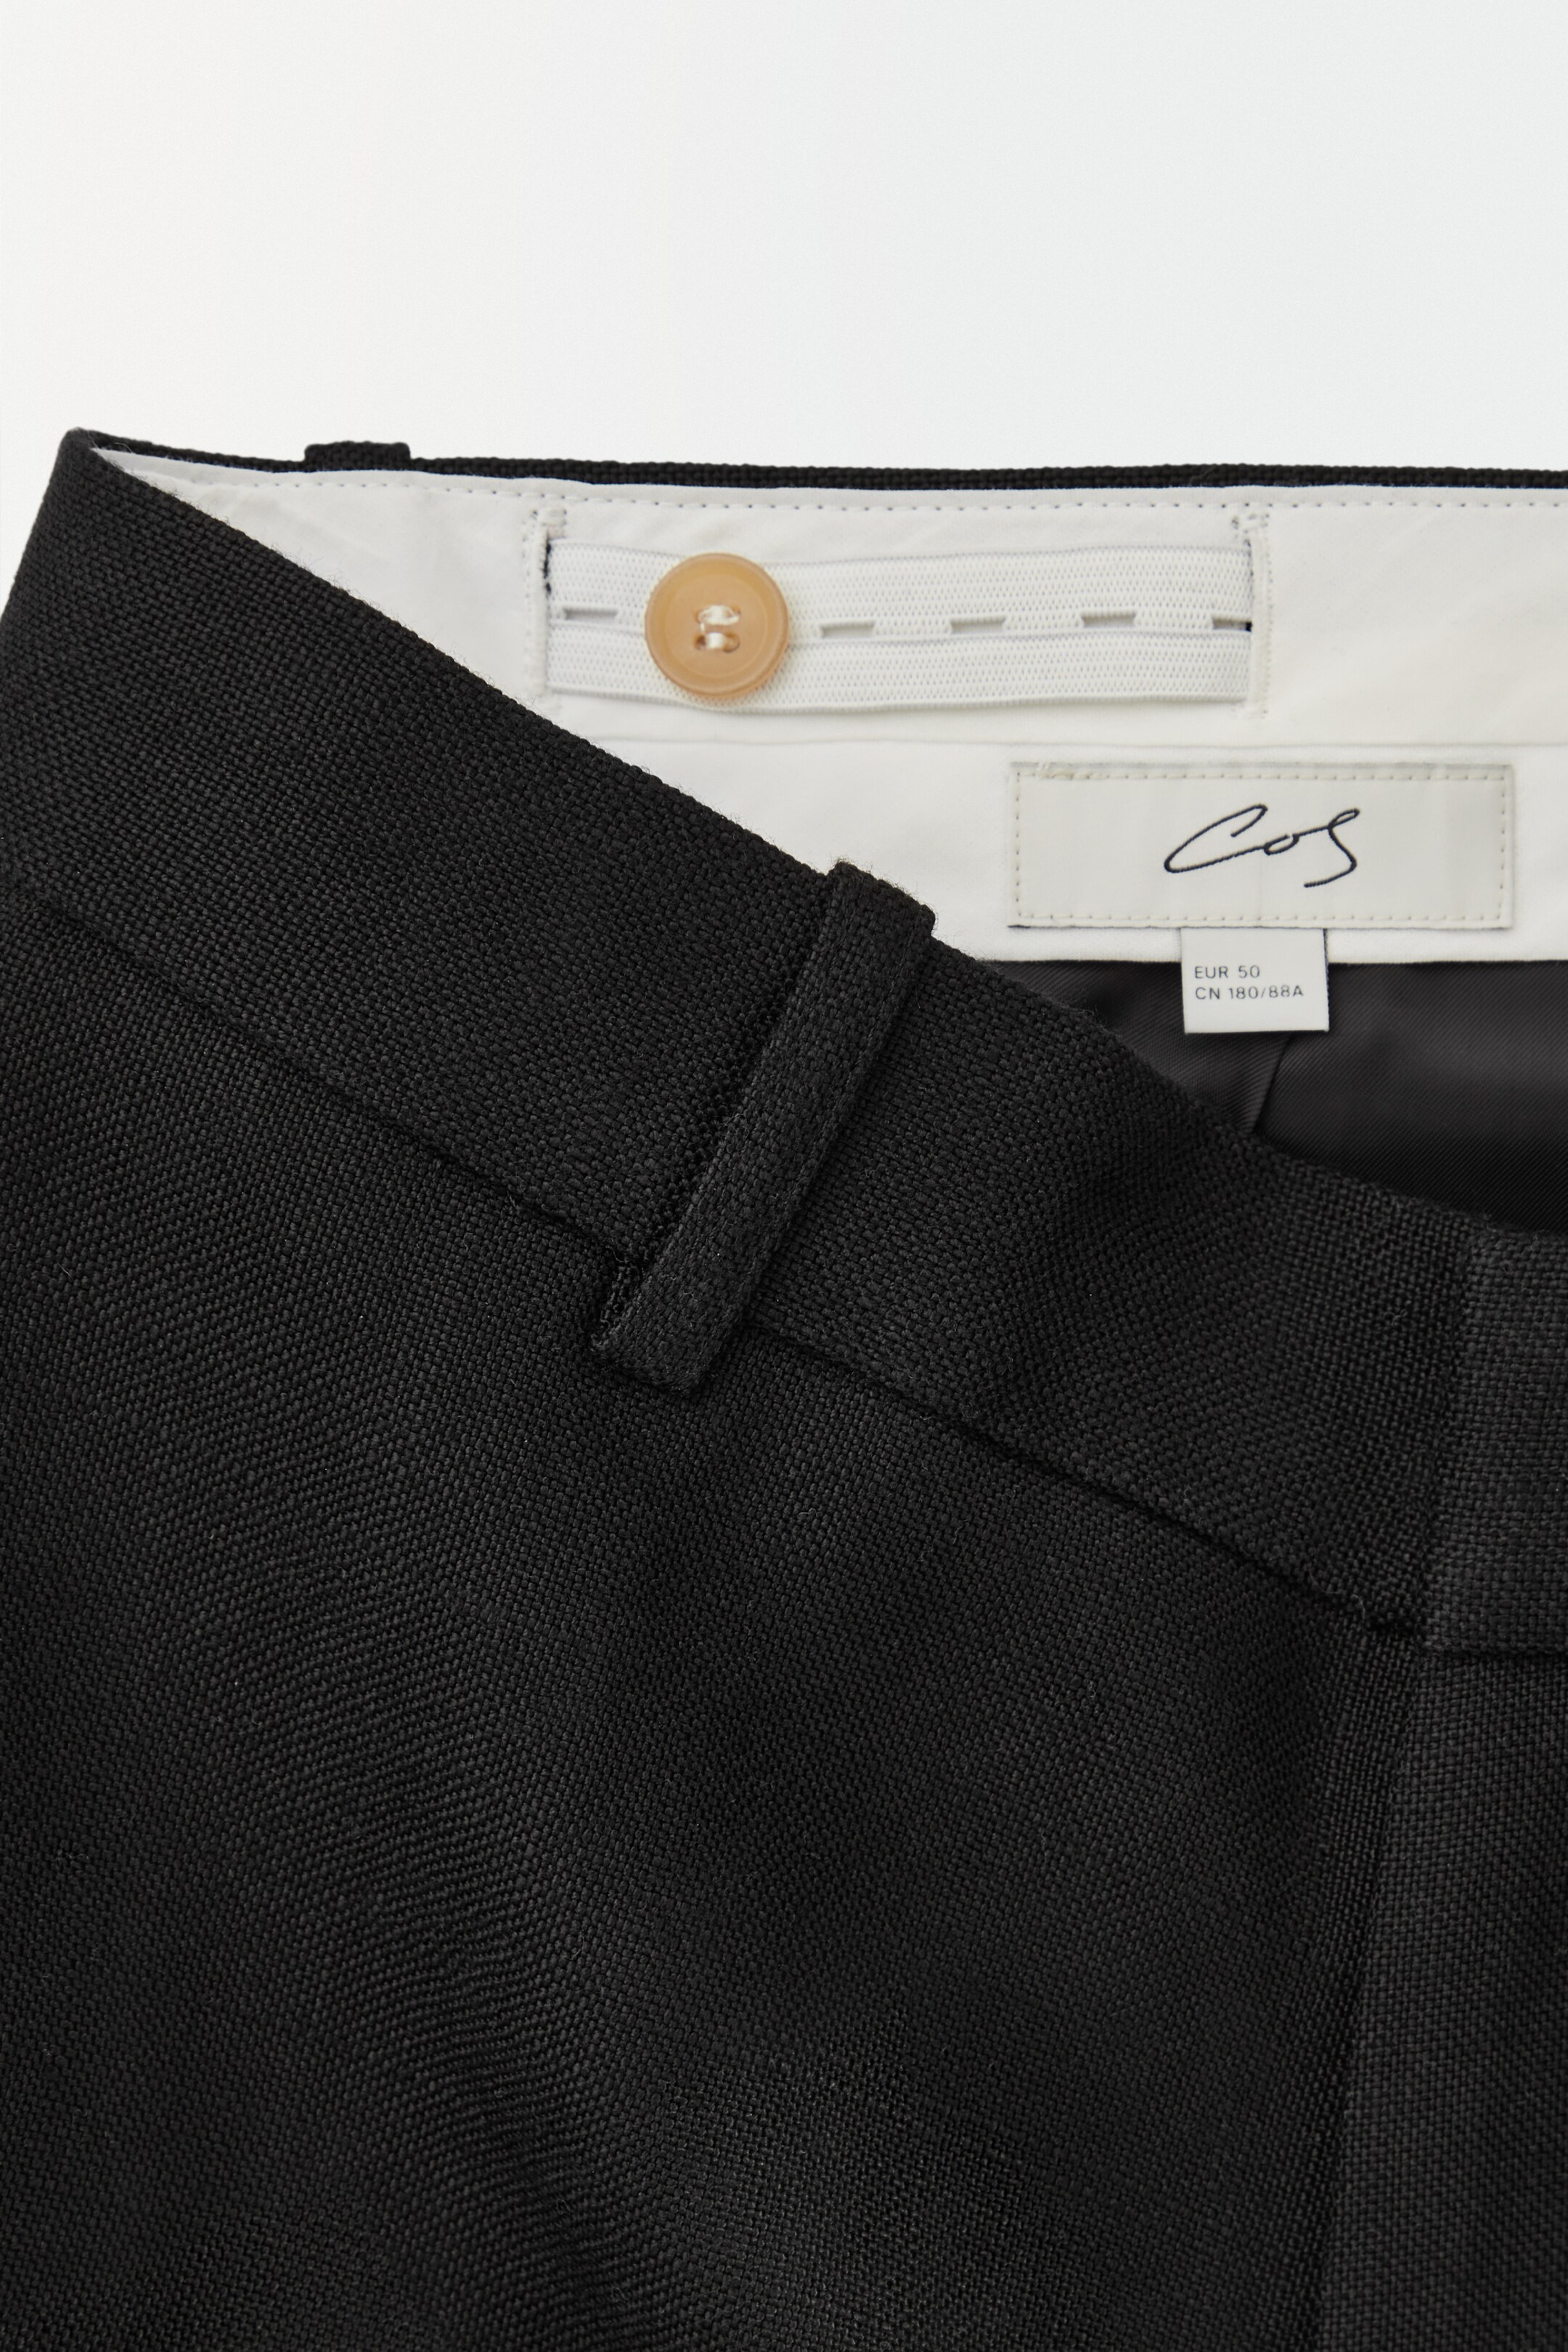 Acne Studios - Tailored pleated shorts - Black